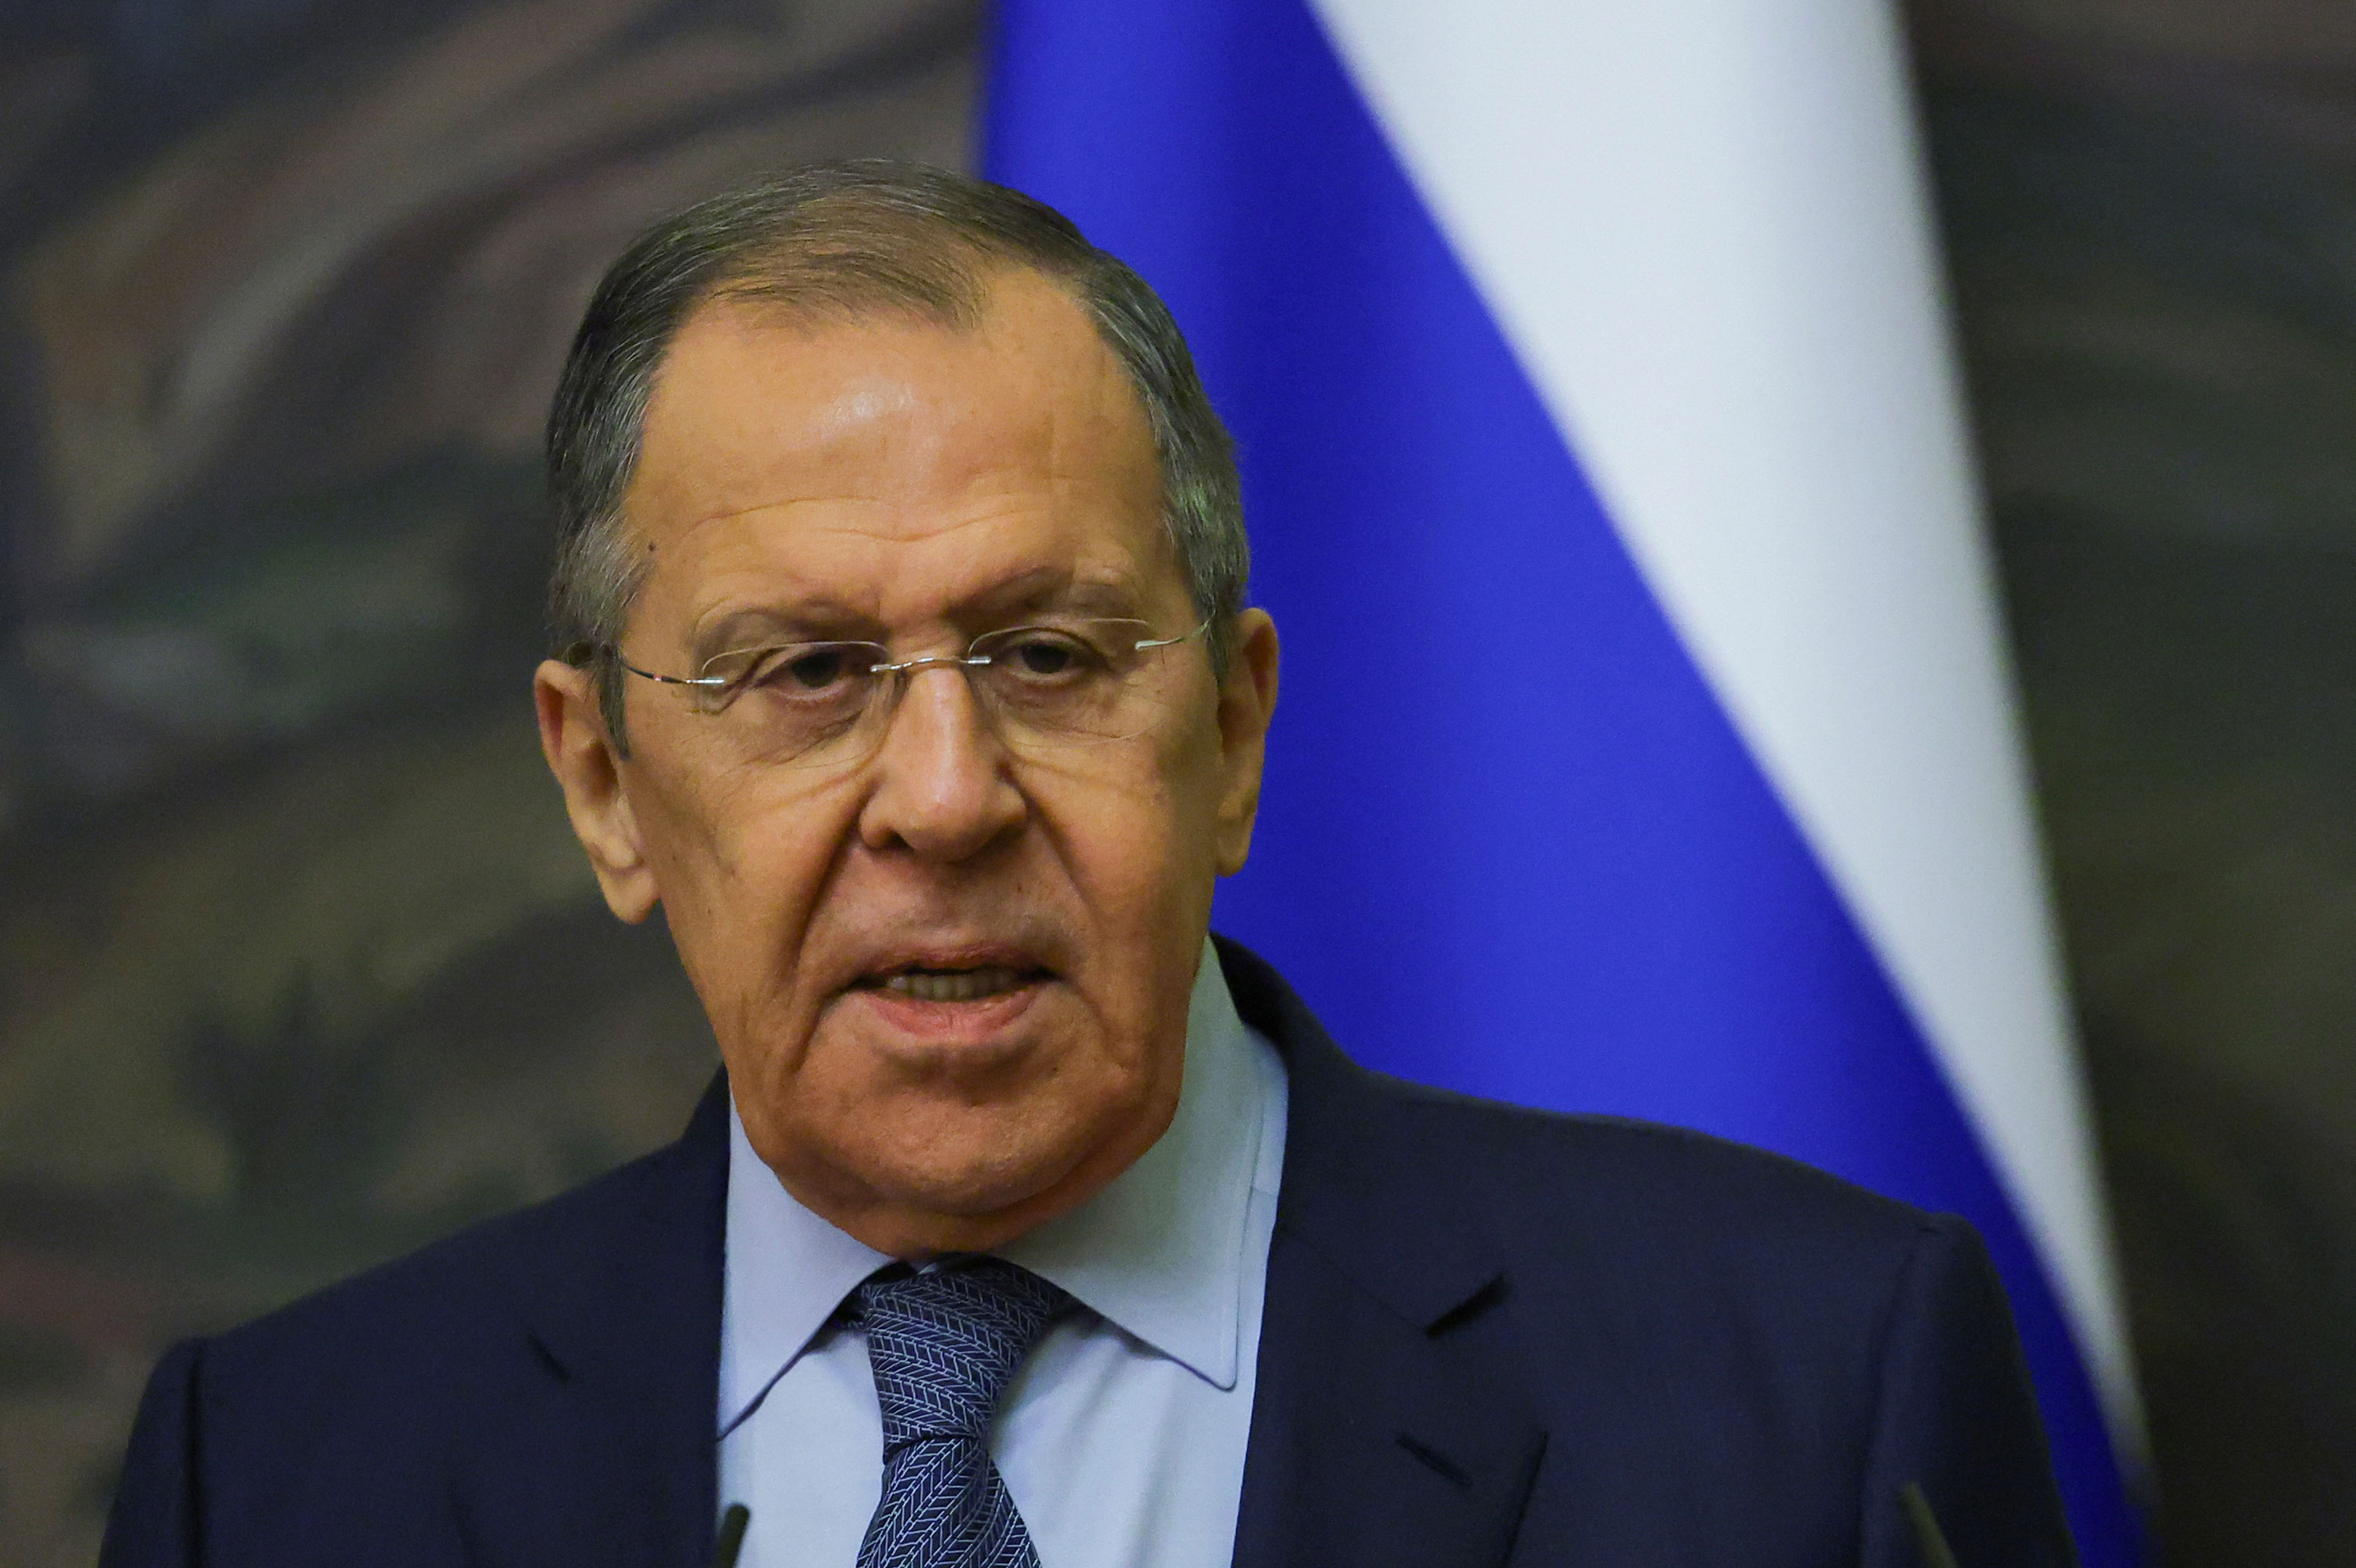 Russia’s foreign minister calls on West for maximum restraint “in order to minimize nuclear risks”